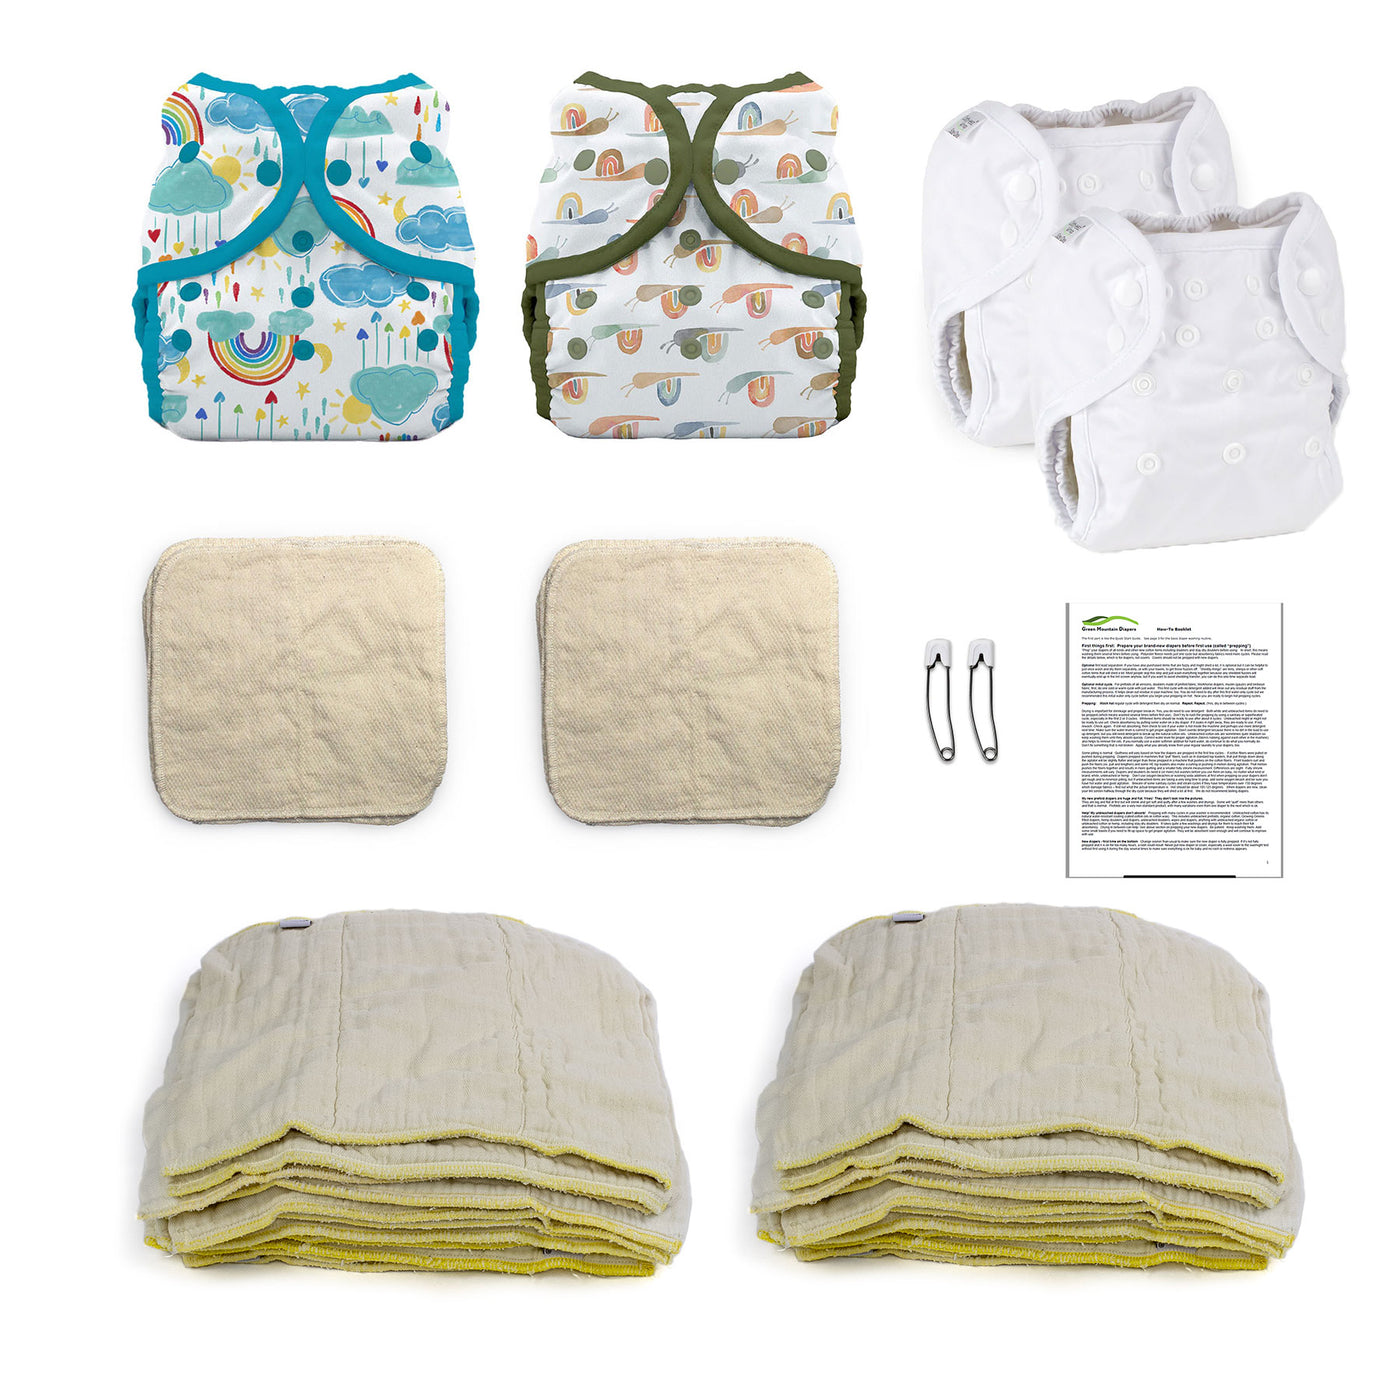 rainbow baby cloth diaper kit with natural diapers and wipes